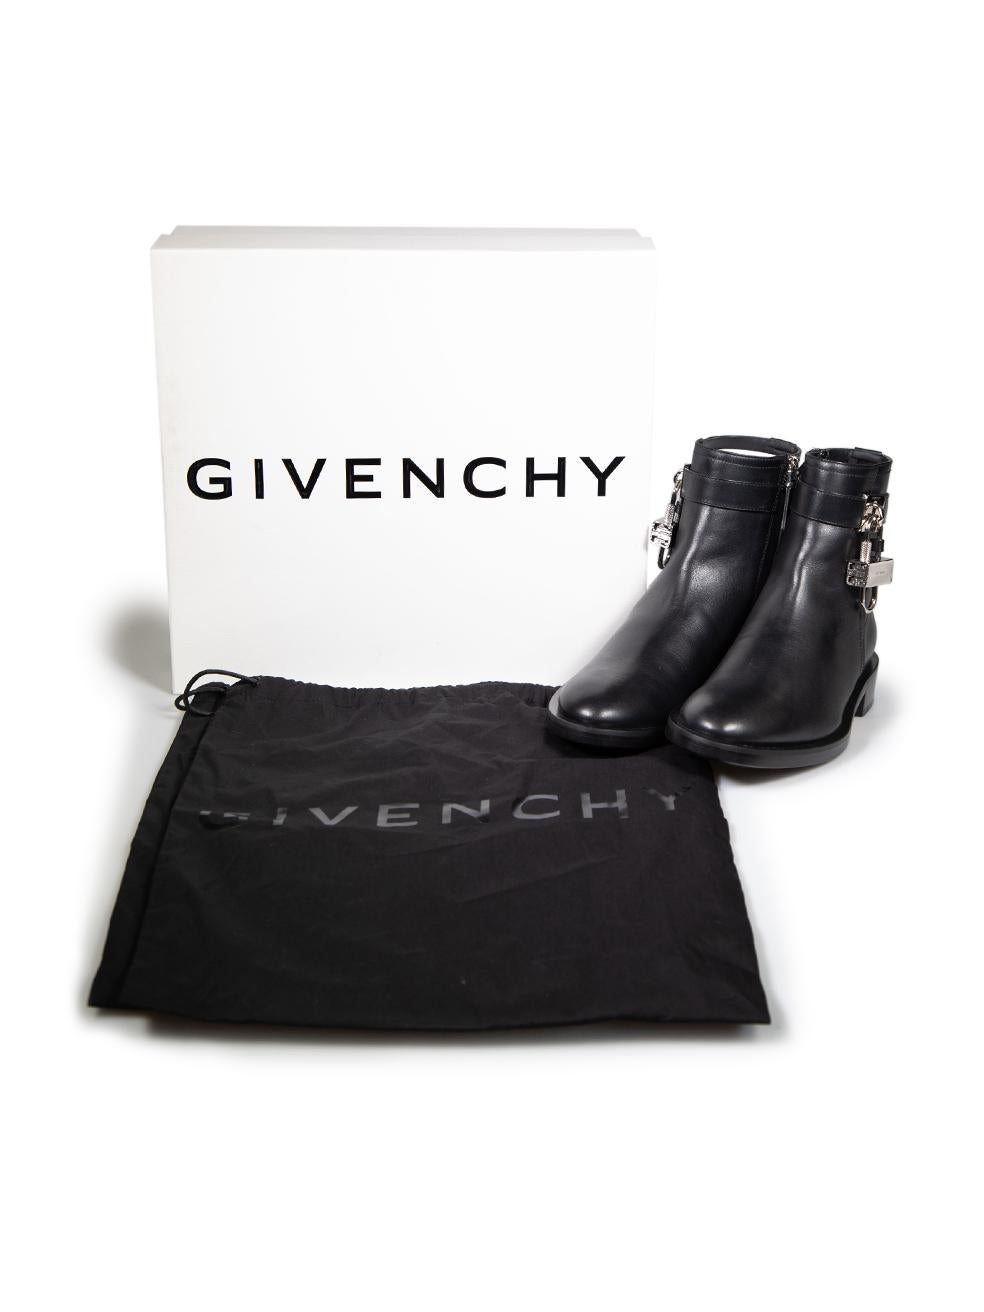 Givenchy Black Leather Lock Ankle Boots Size IT 36.5 For Sale 3